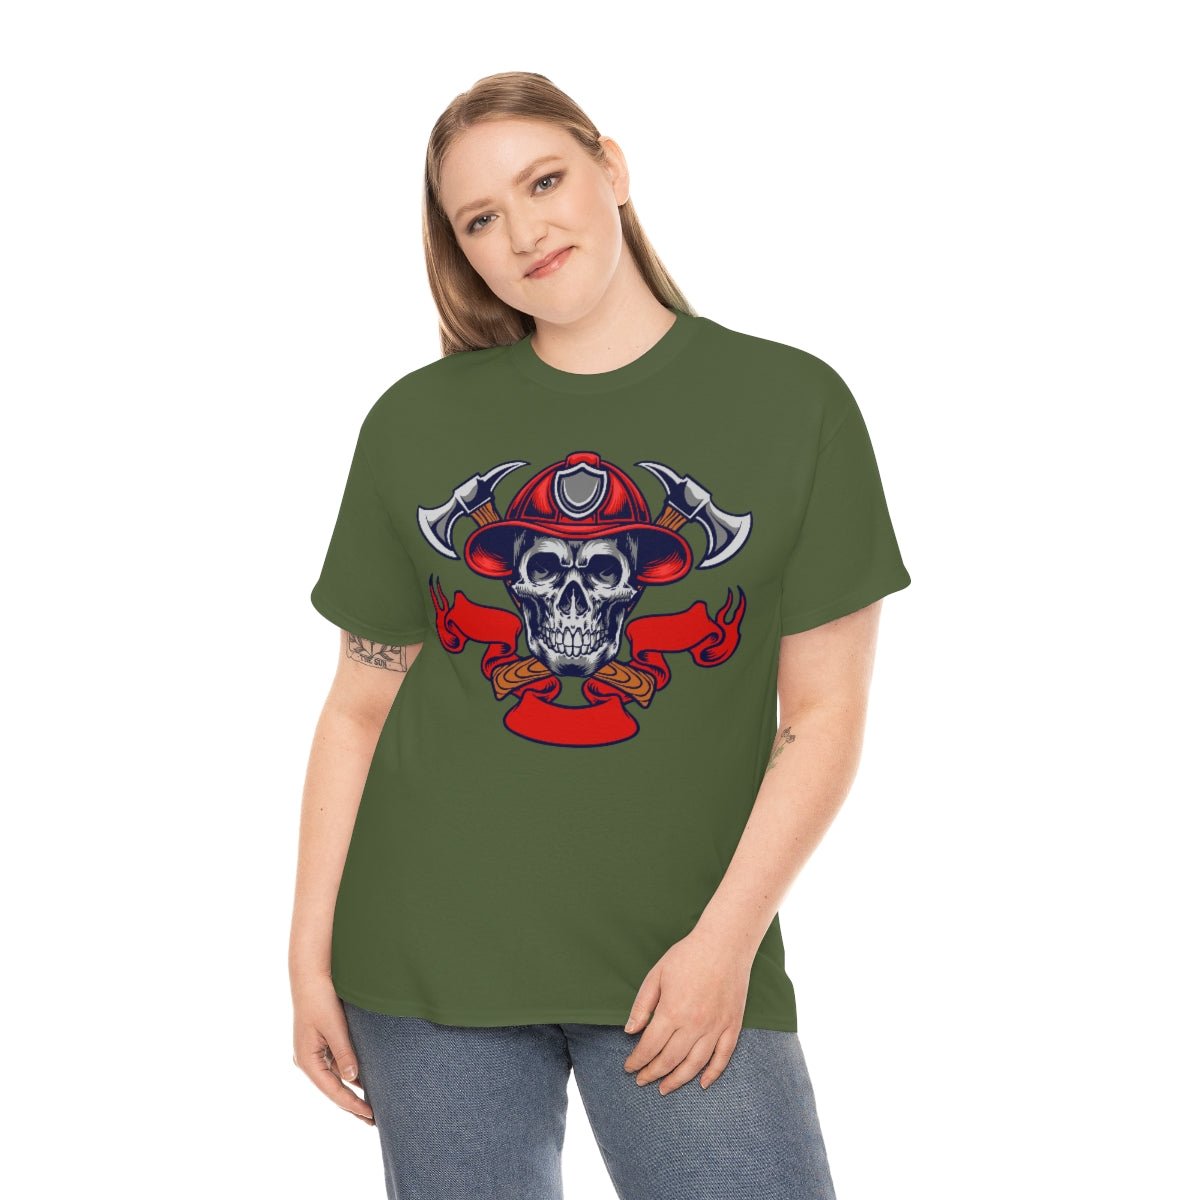 Fire Skull Cotton Tee - Salty Medic Clothing Co.